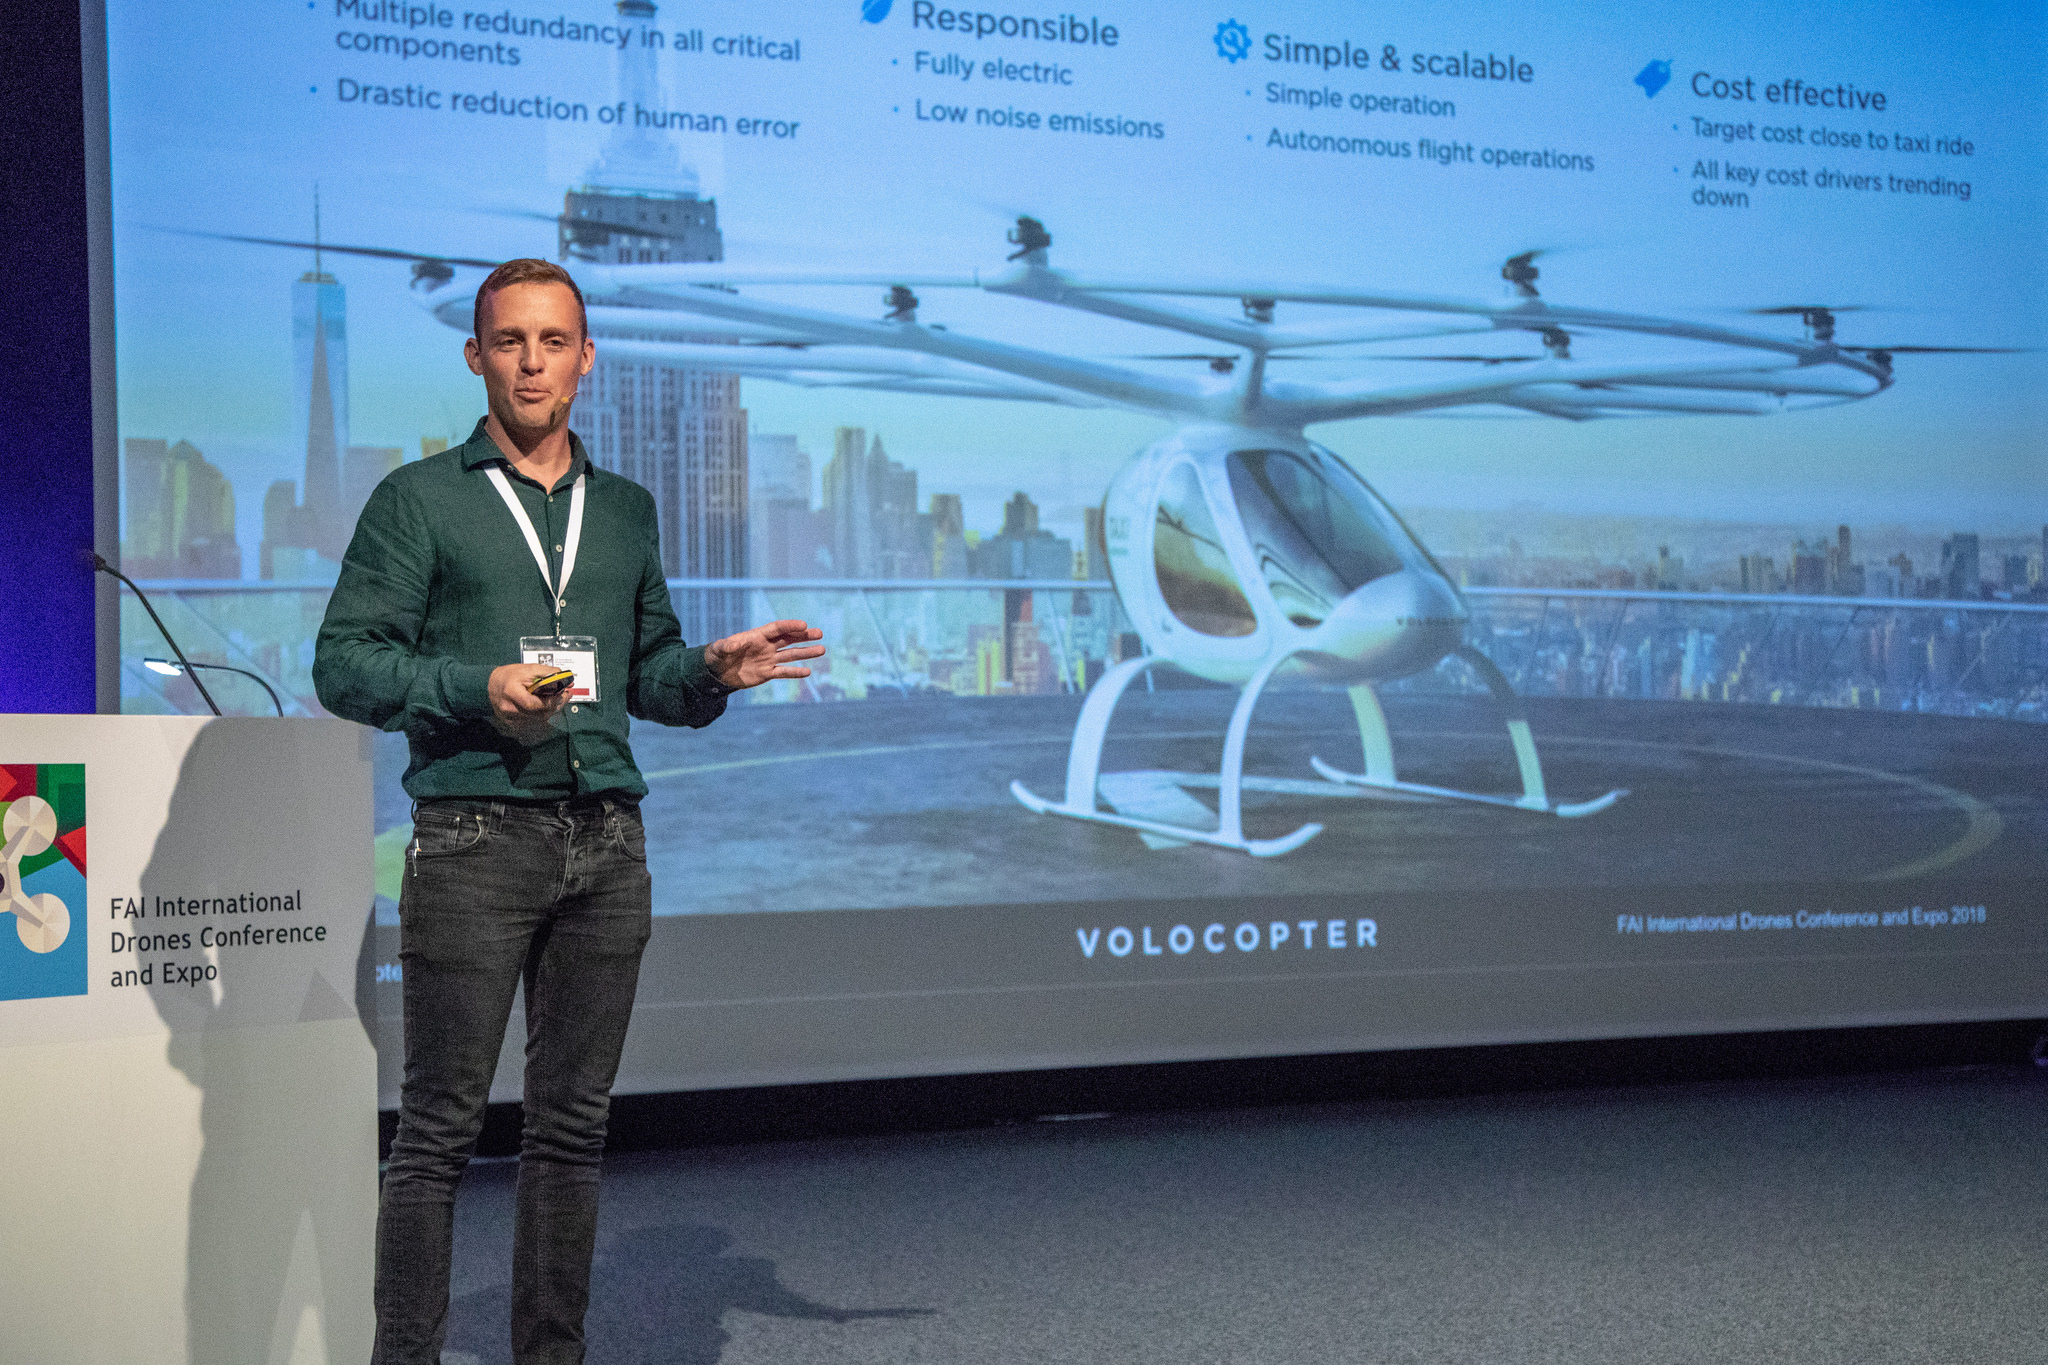 A Volocopter Drone